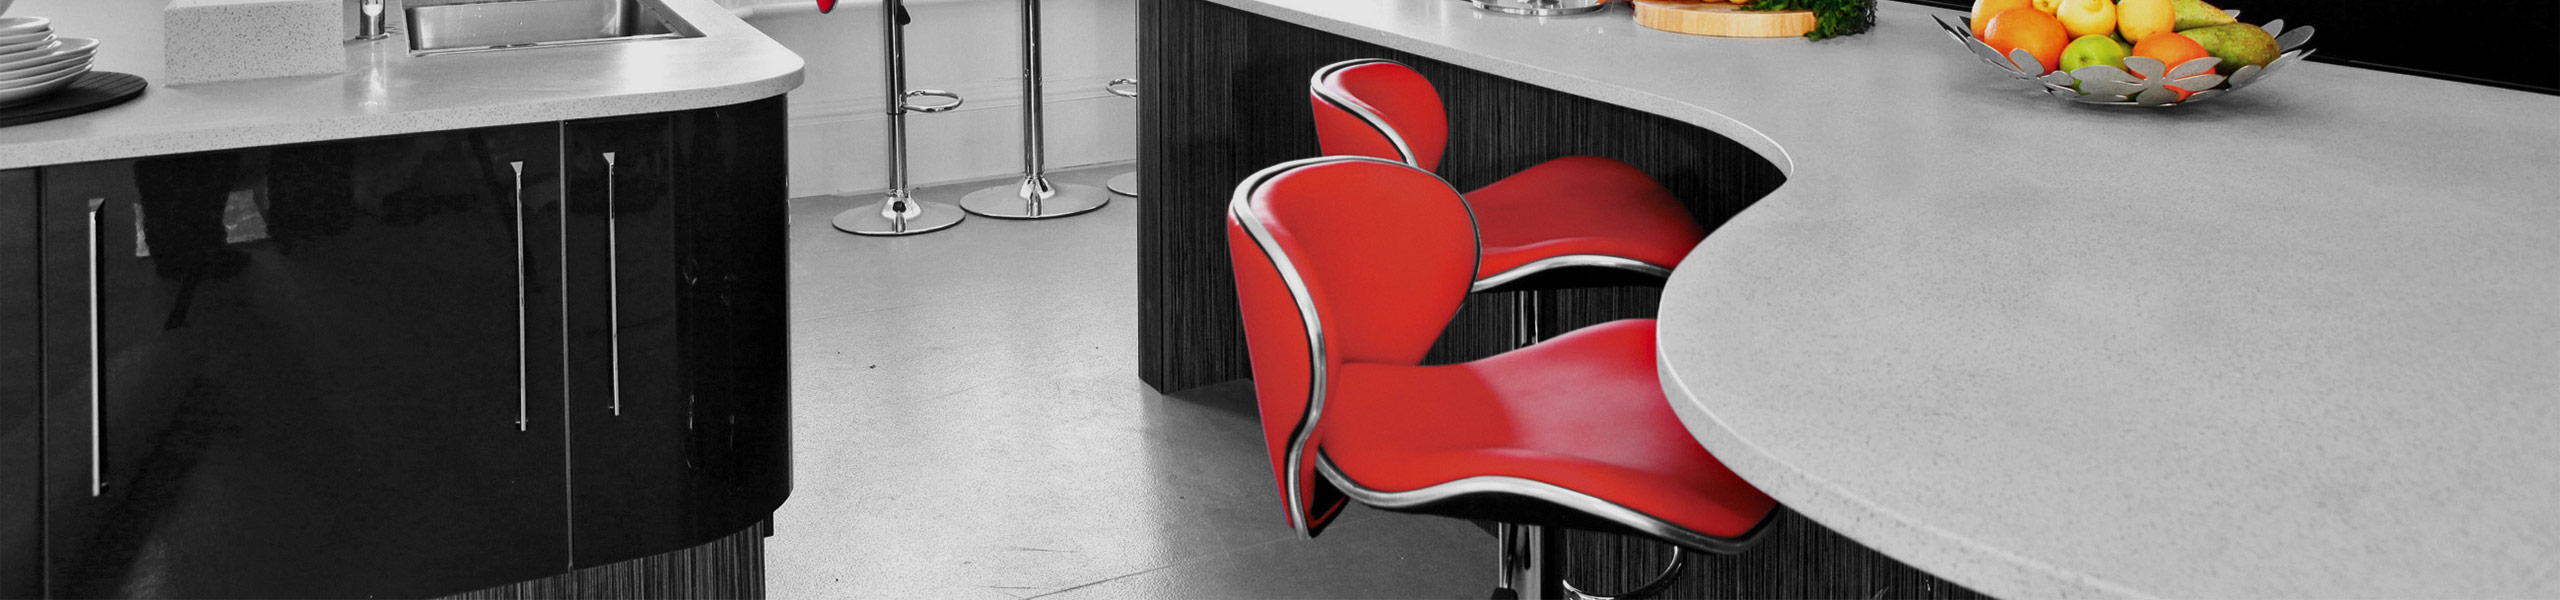 Duo Bar Stool Red Video Banner